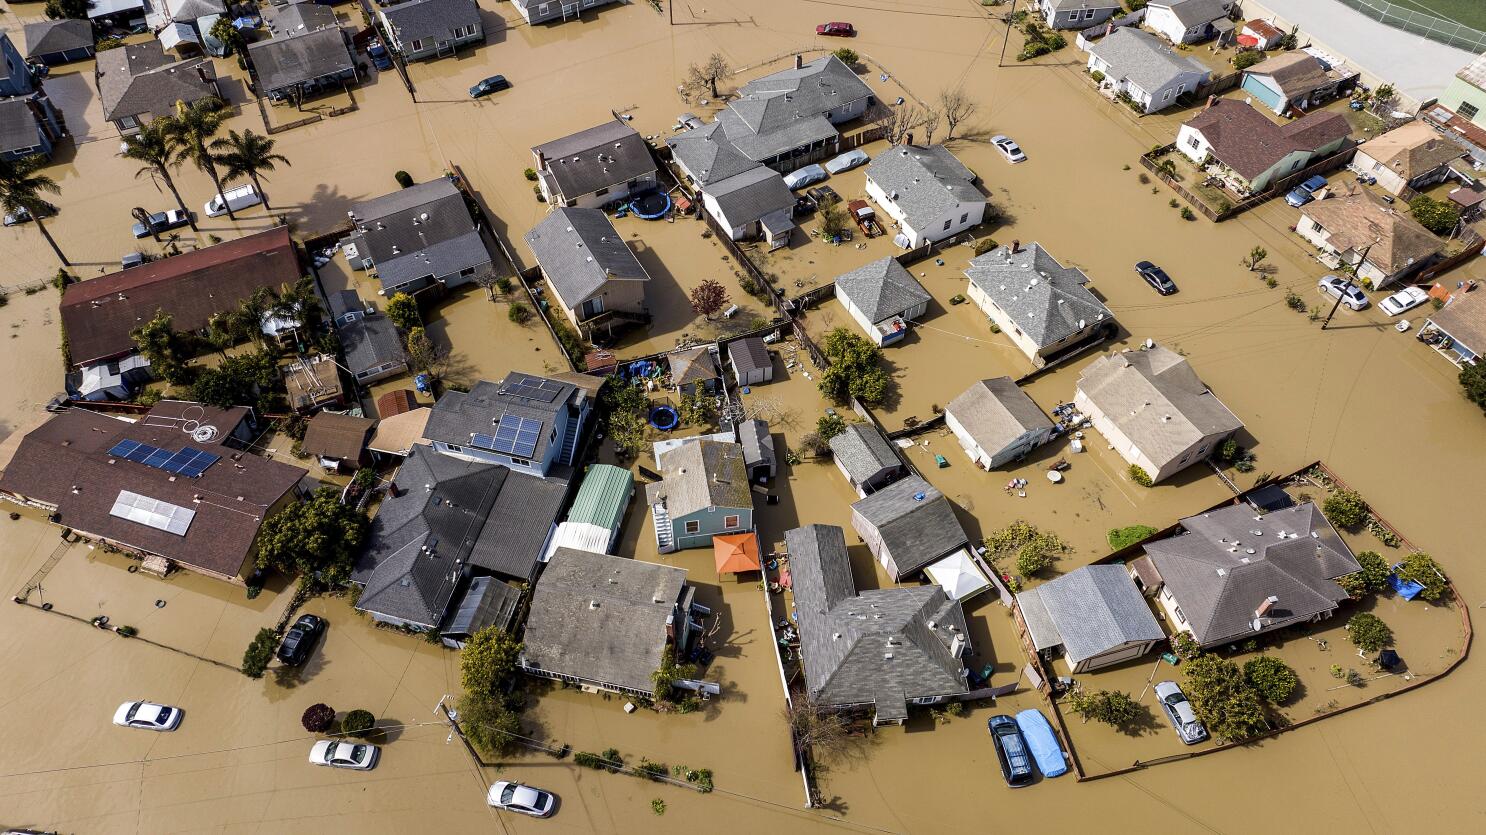 The flood in Pajaro isn't just a 'natural' disaster - Los Angeles Times